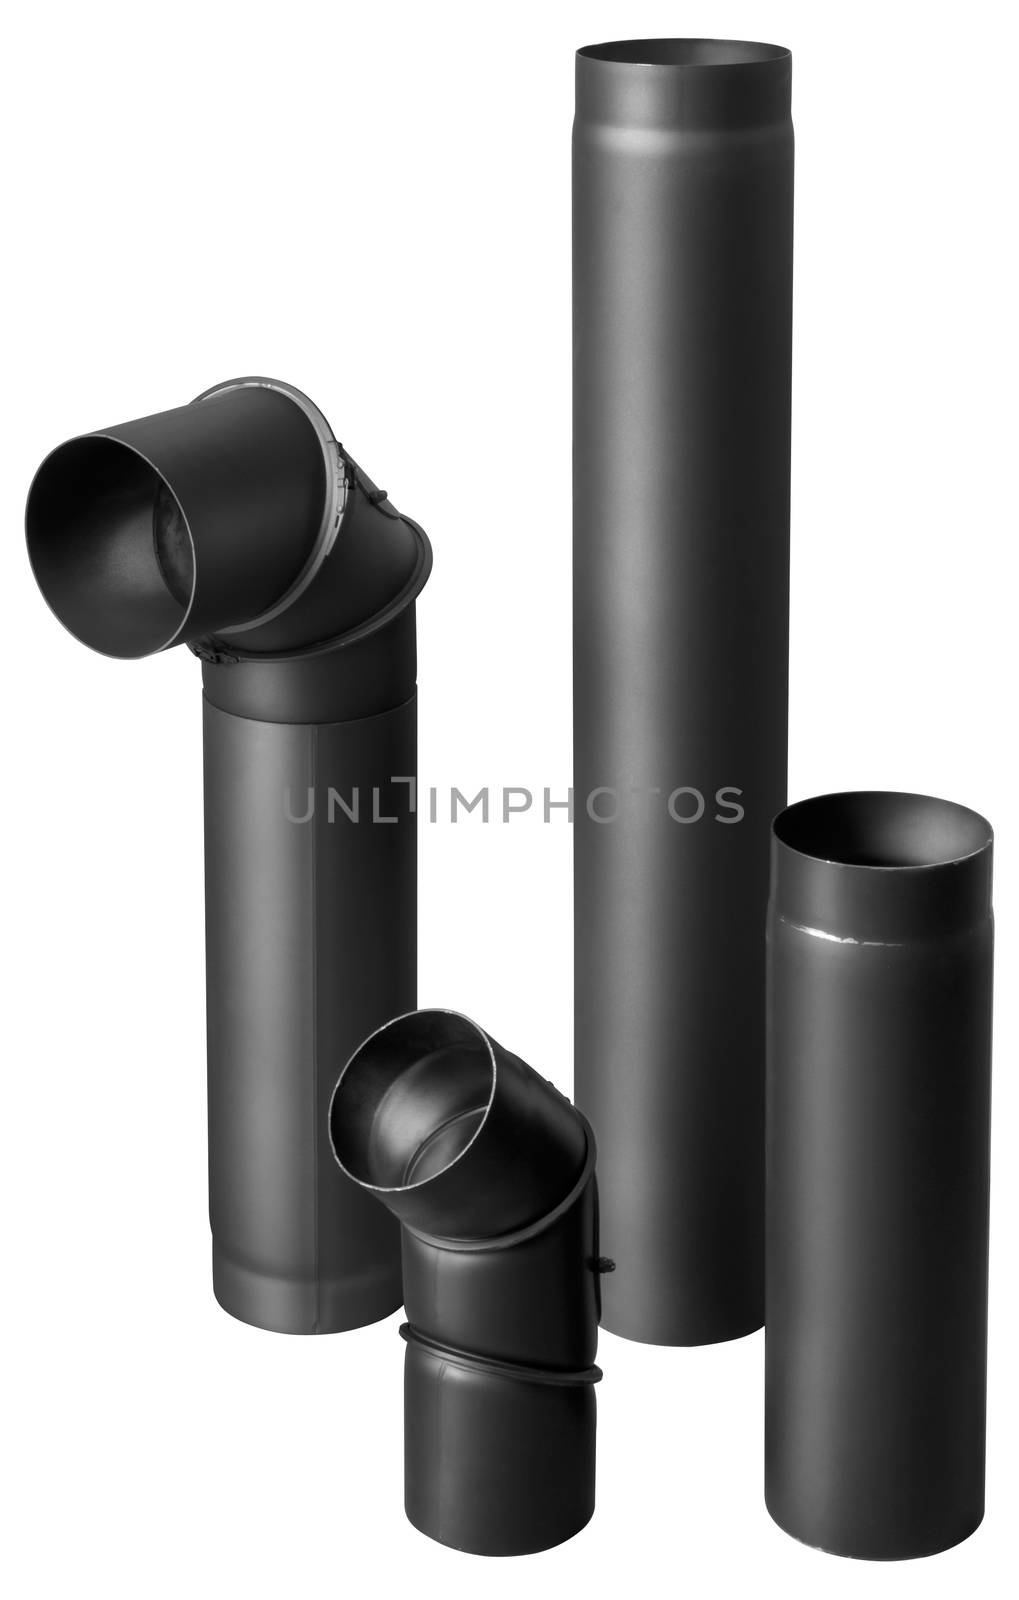 set of black metal fire-resistant pipes for fireplaces